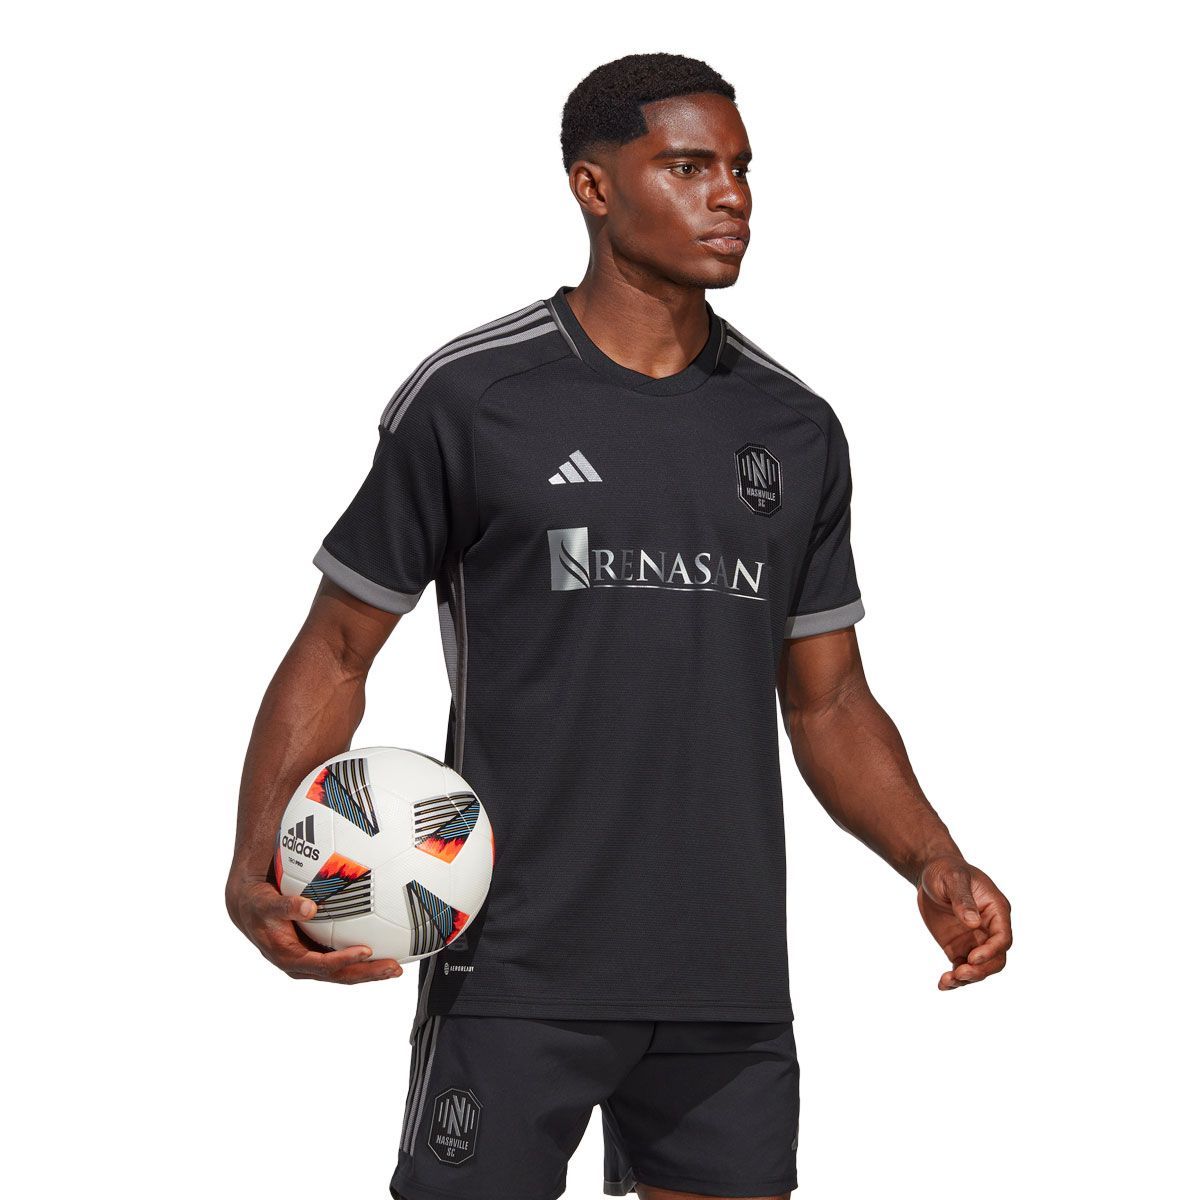 Nashville SC's 'Man In Black' Jersey Is 2023's Second Highest Sold MLS Kit  - The Sports Credential